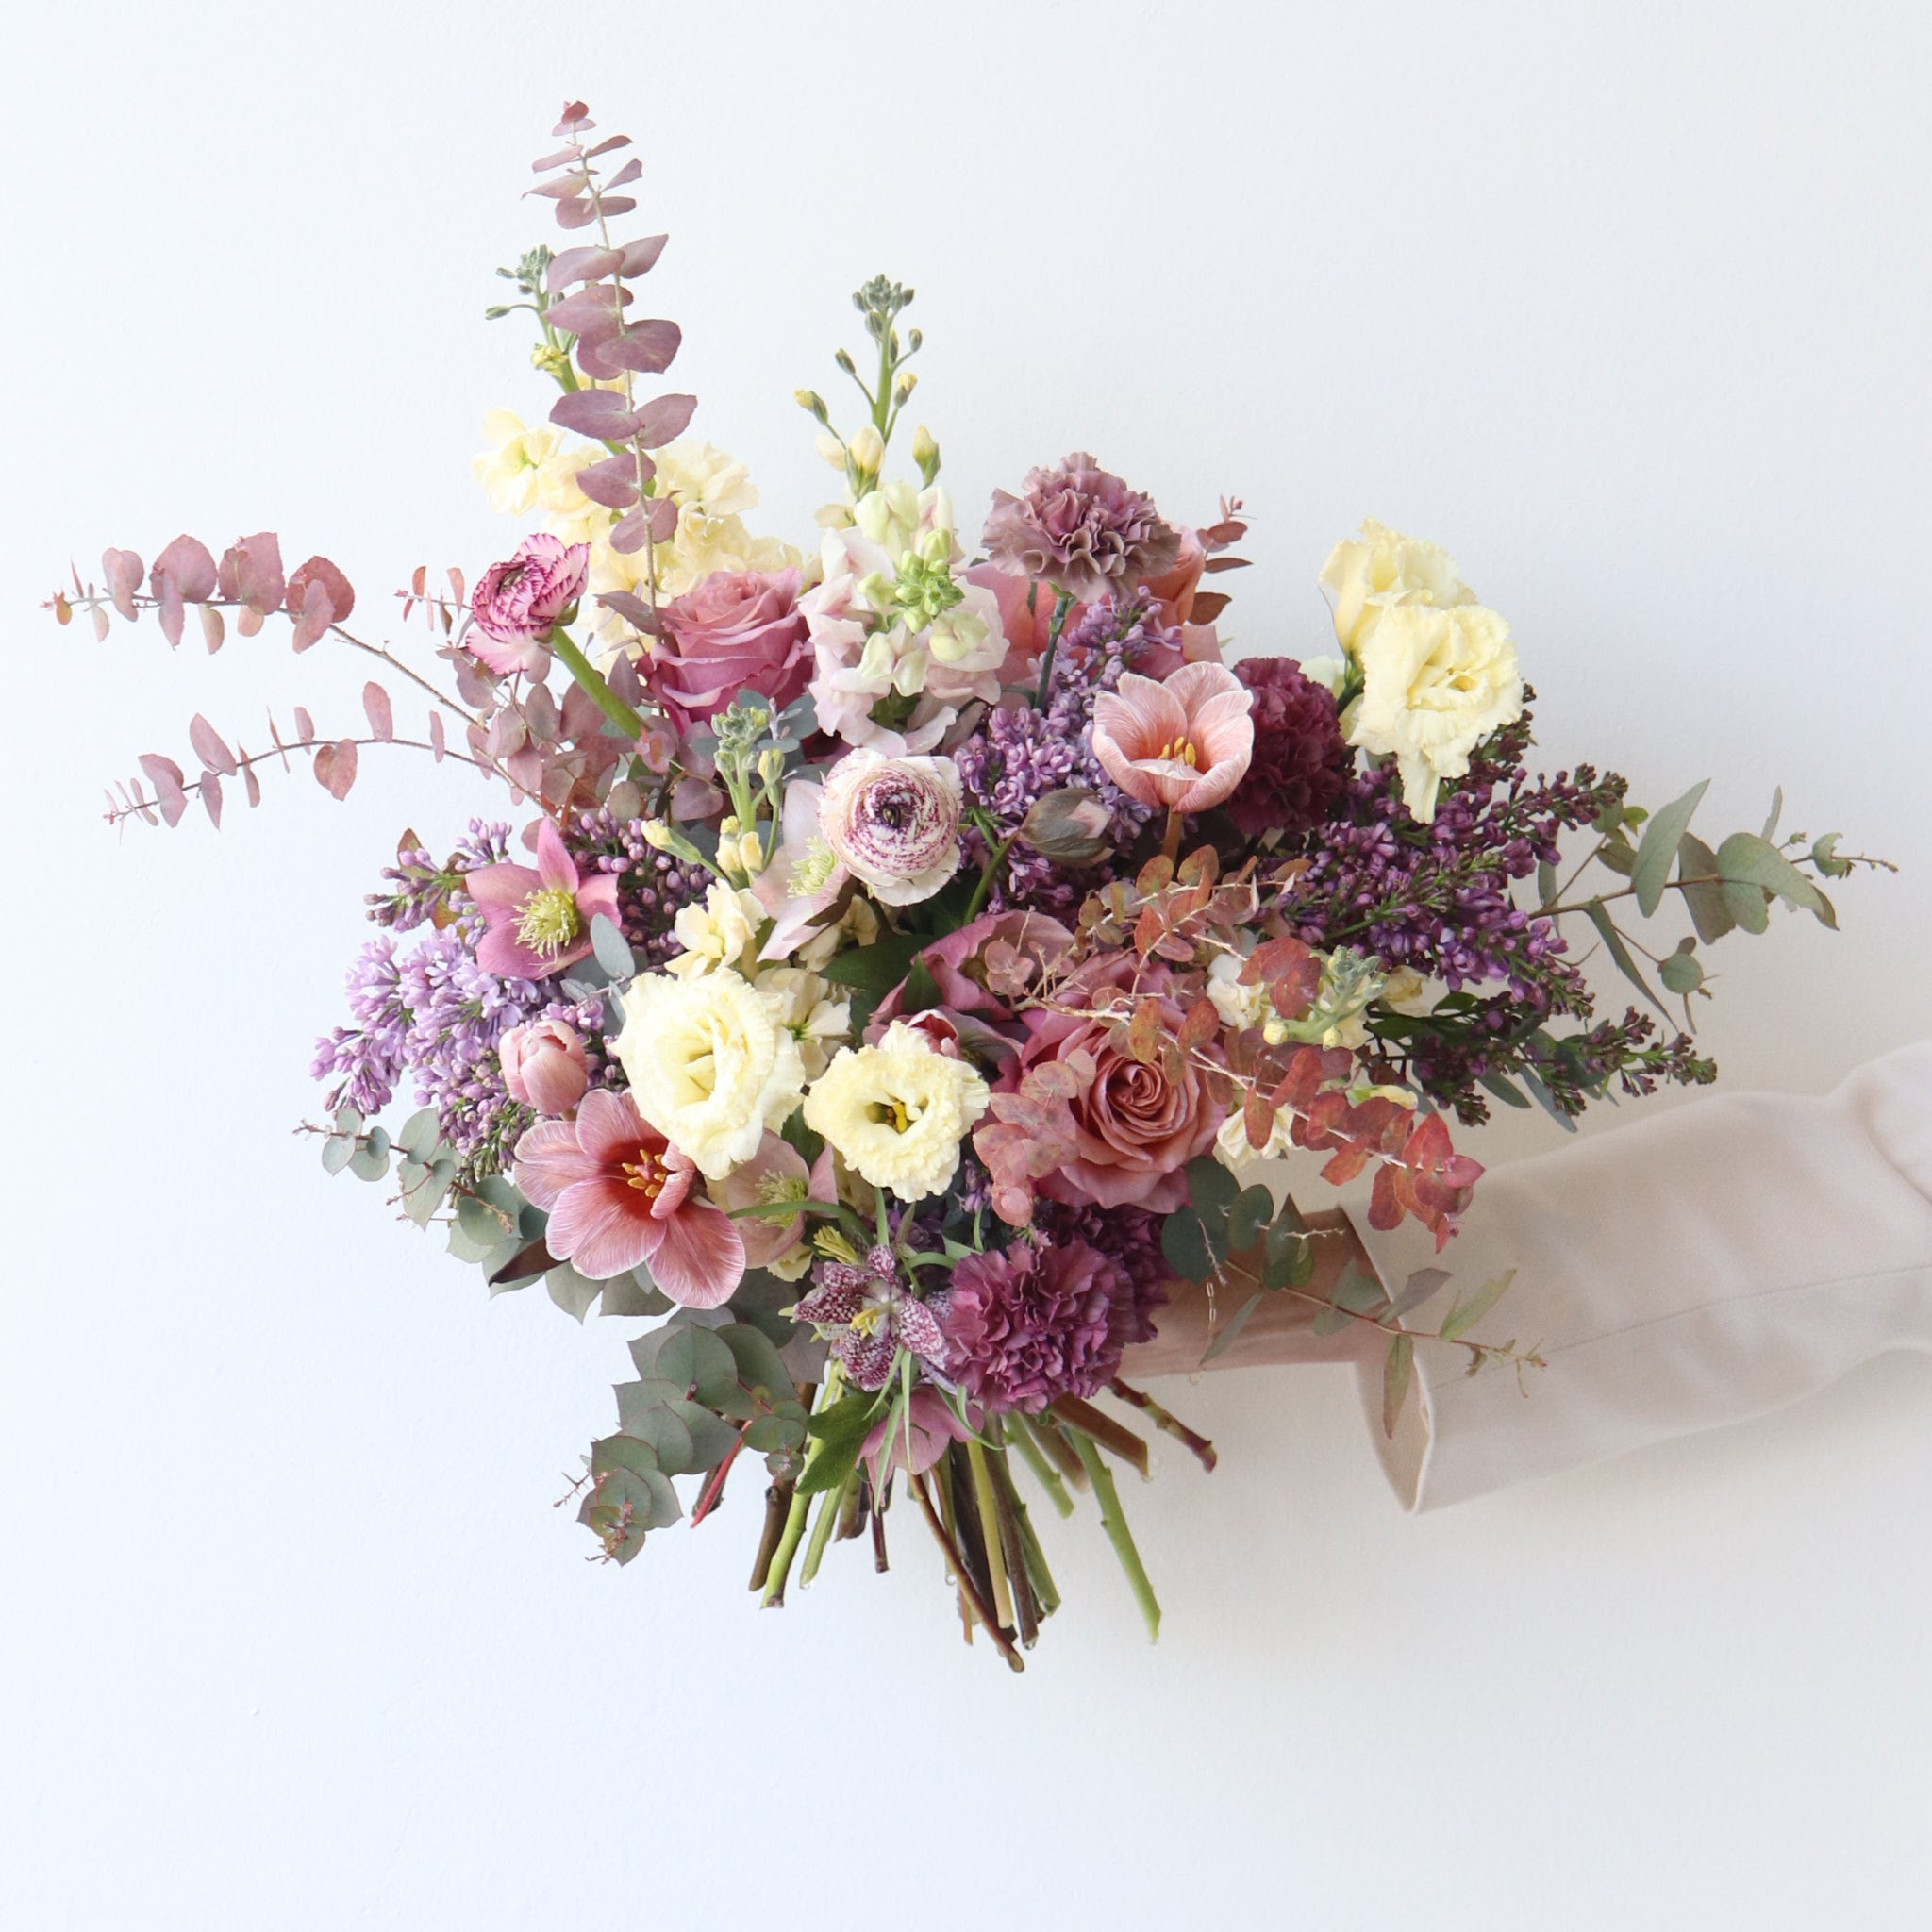 Lavender Skies Hand-Tied Bouquet